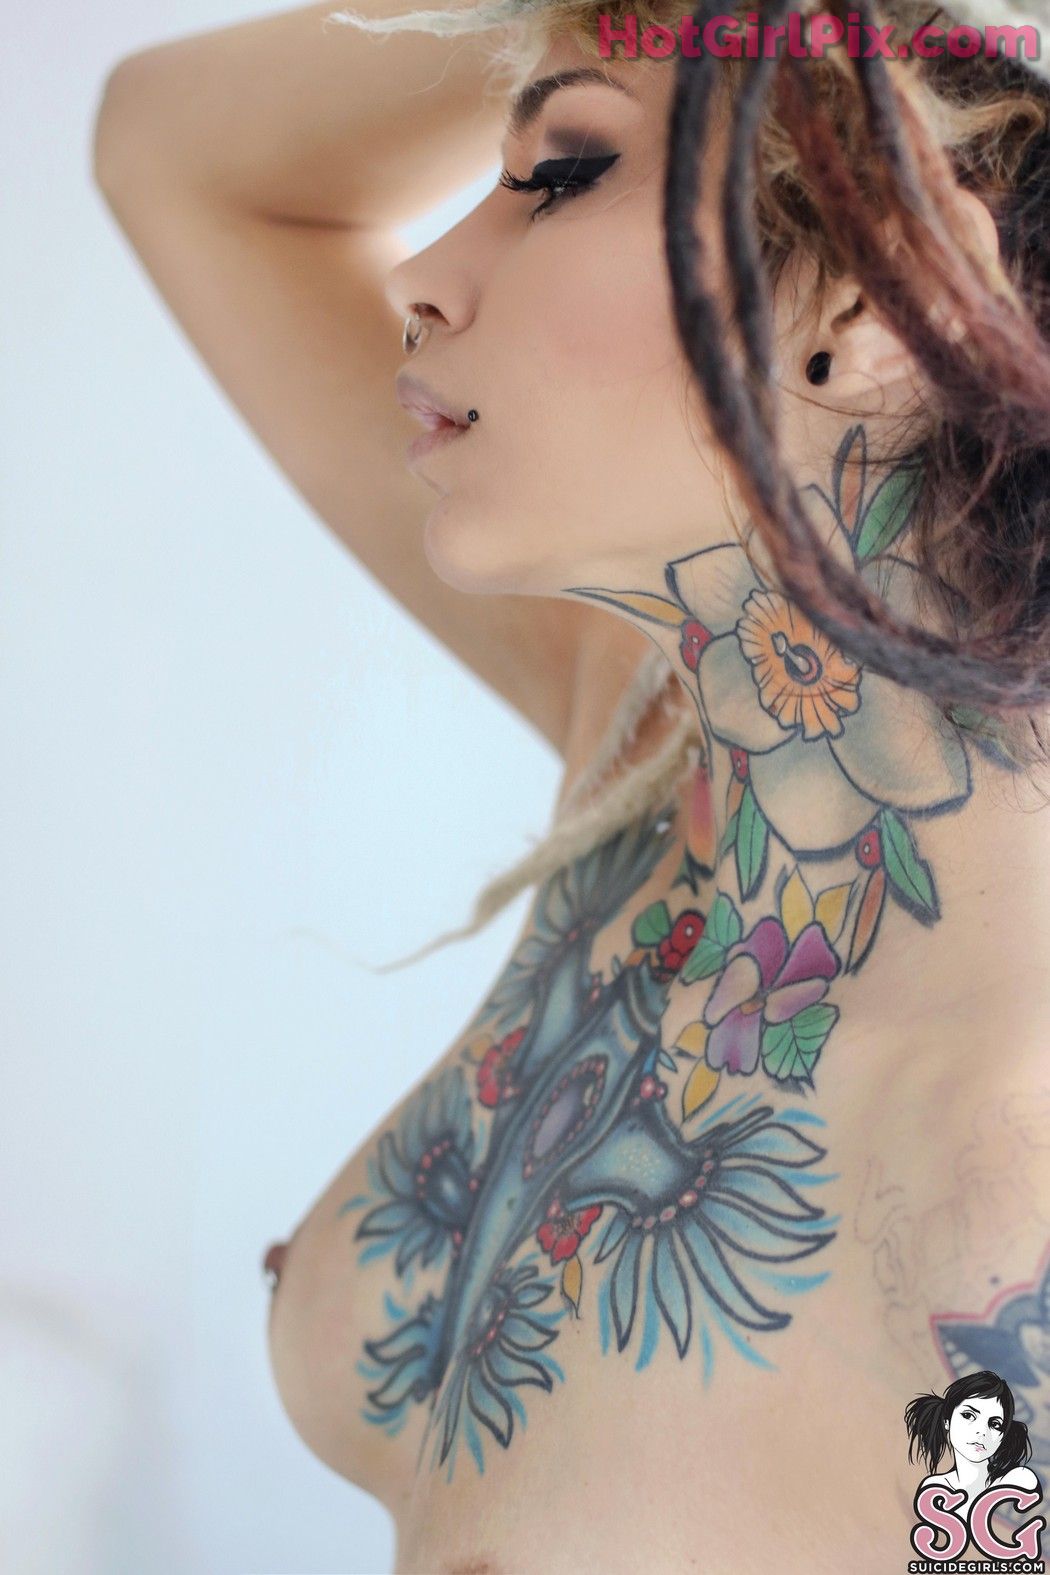 [Suicide Girls] Fishball - White Nymph